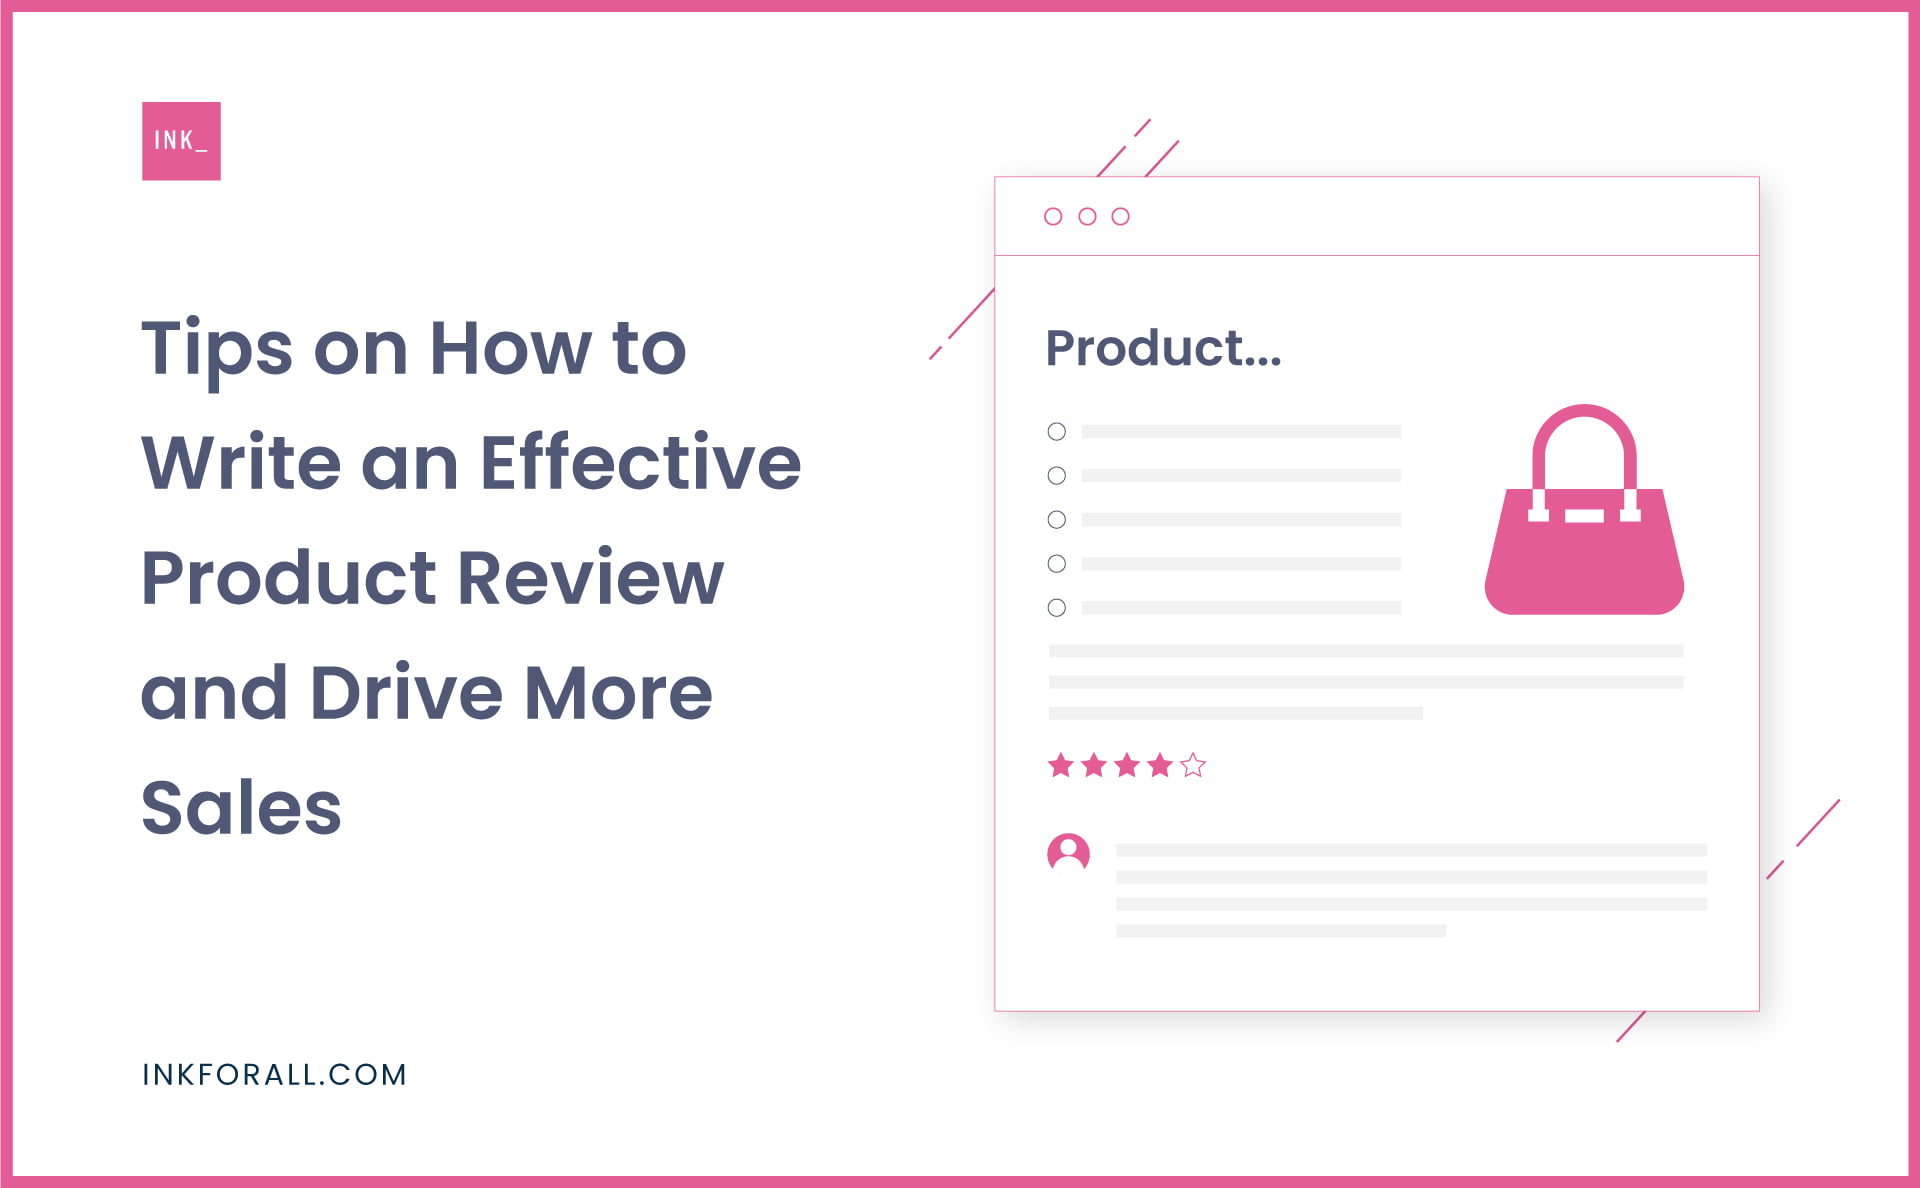 Tips on How to Write an Effective Product Review and Drive More